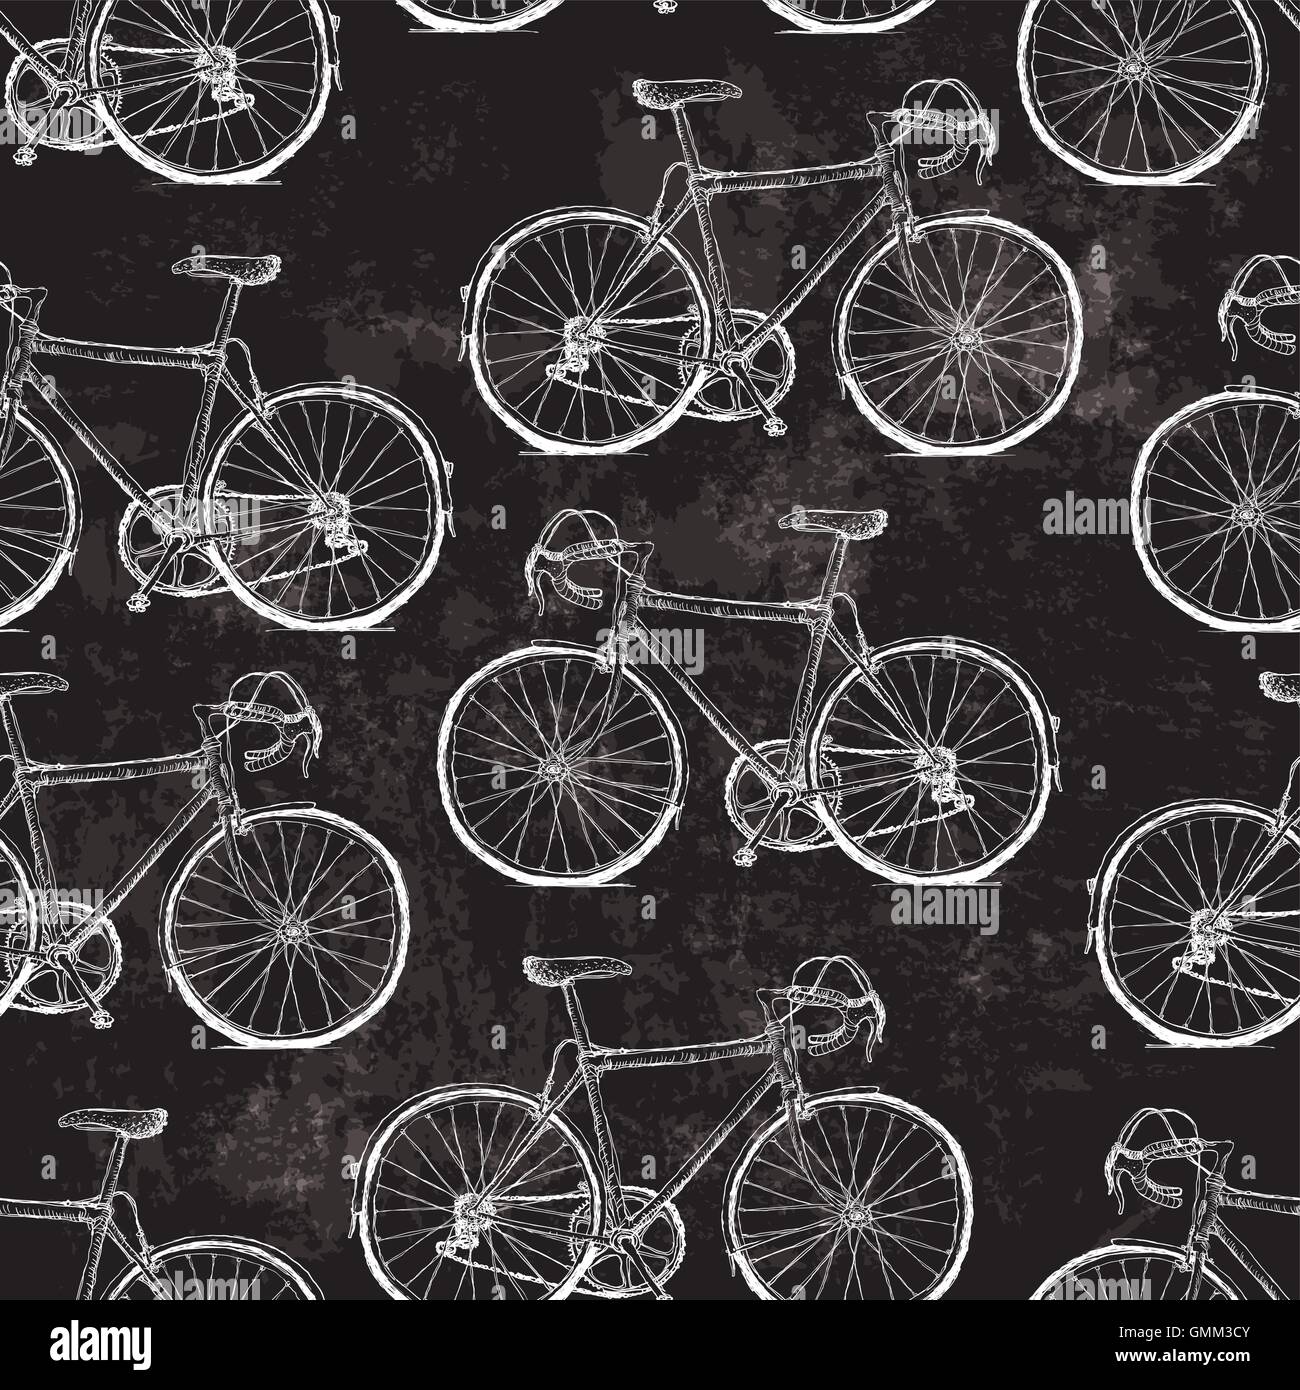 Vintage Bicycles Seamless Pattern on Black Grunge Background Stock Vector